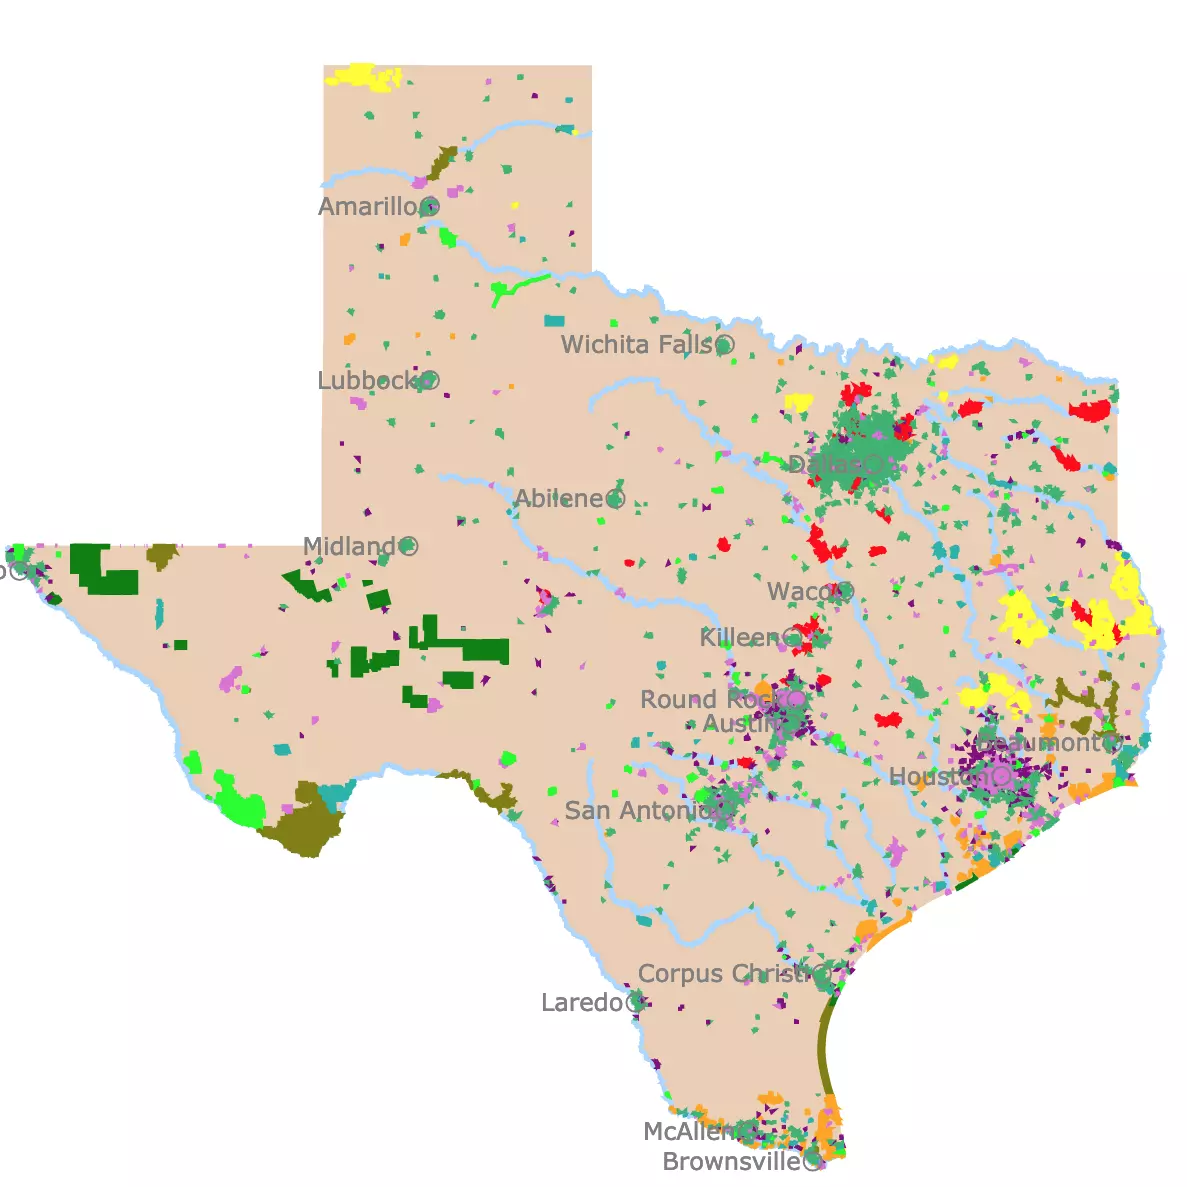 Map of National Parks, National Forests, and State Parks in Texas